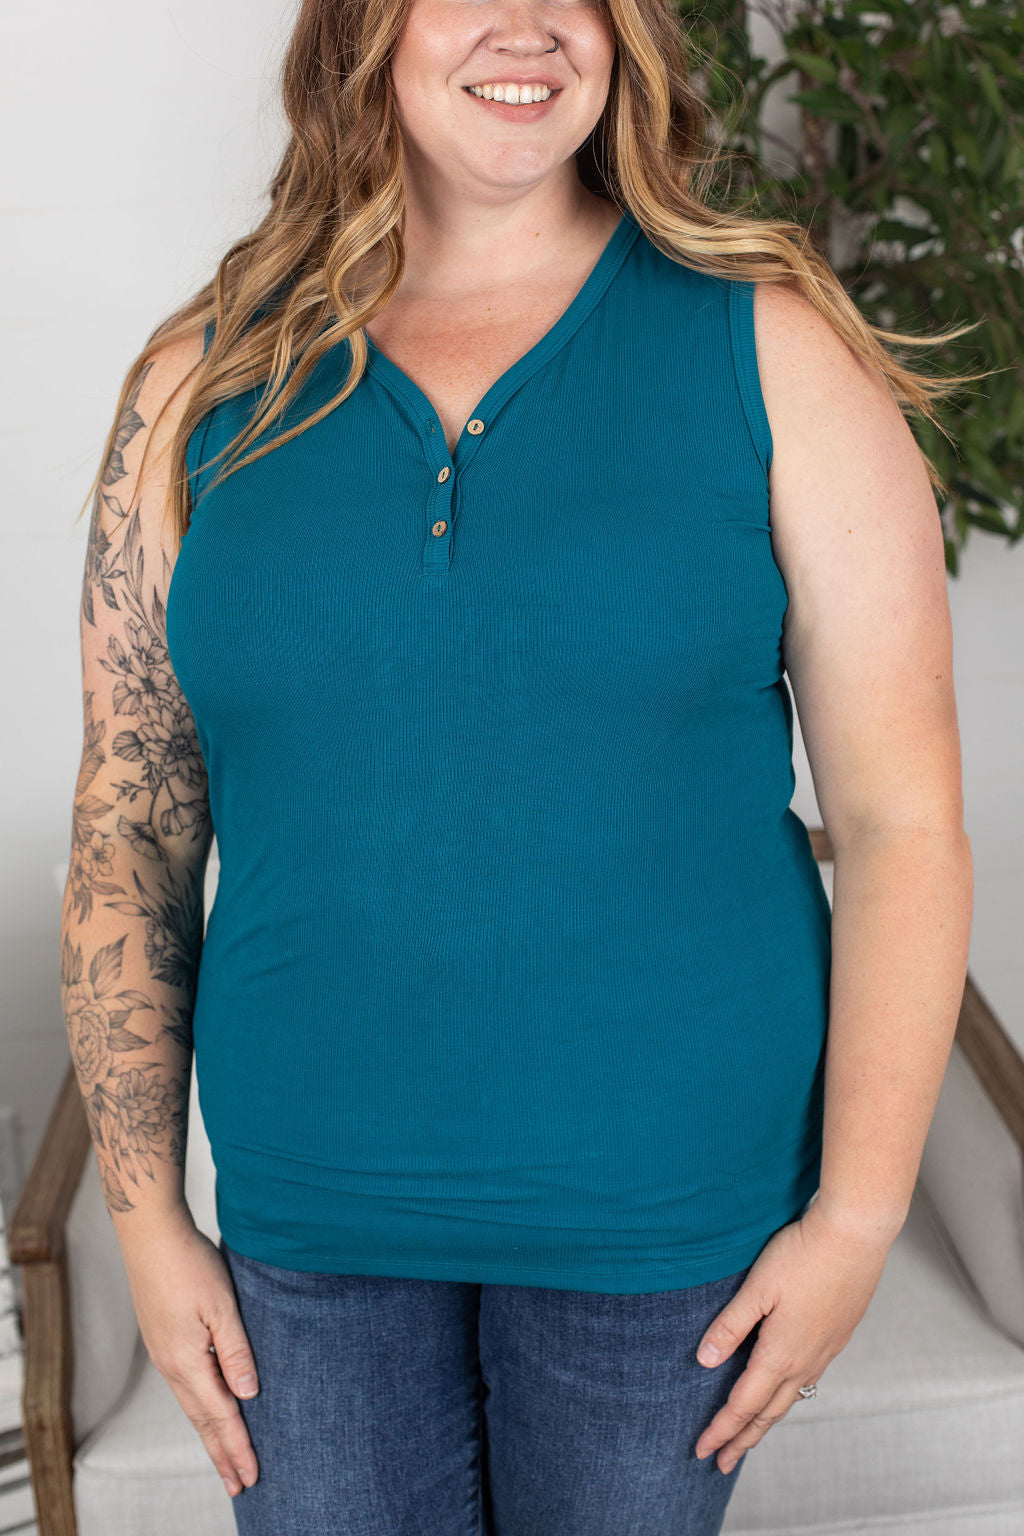 IN STOCK Addison Henley Tank - Teal